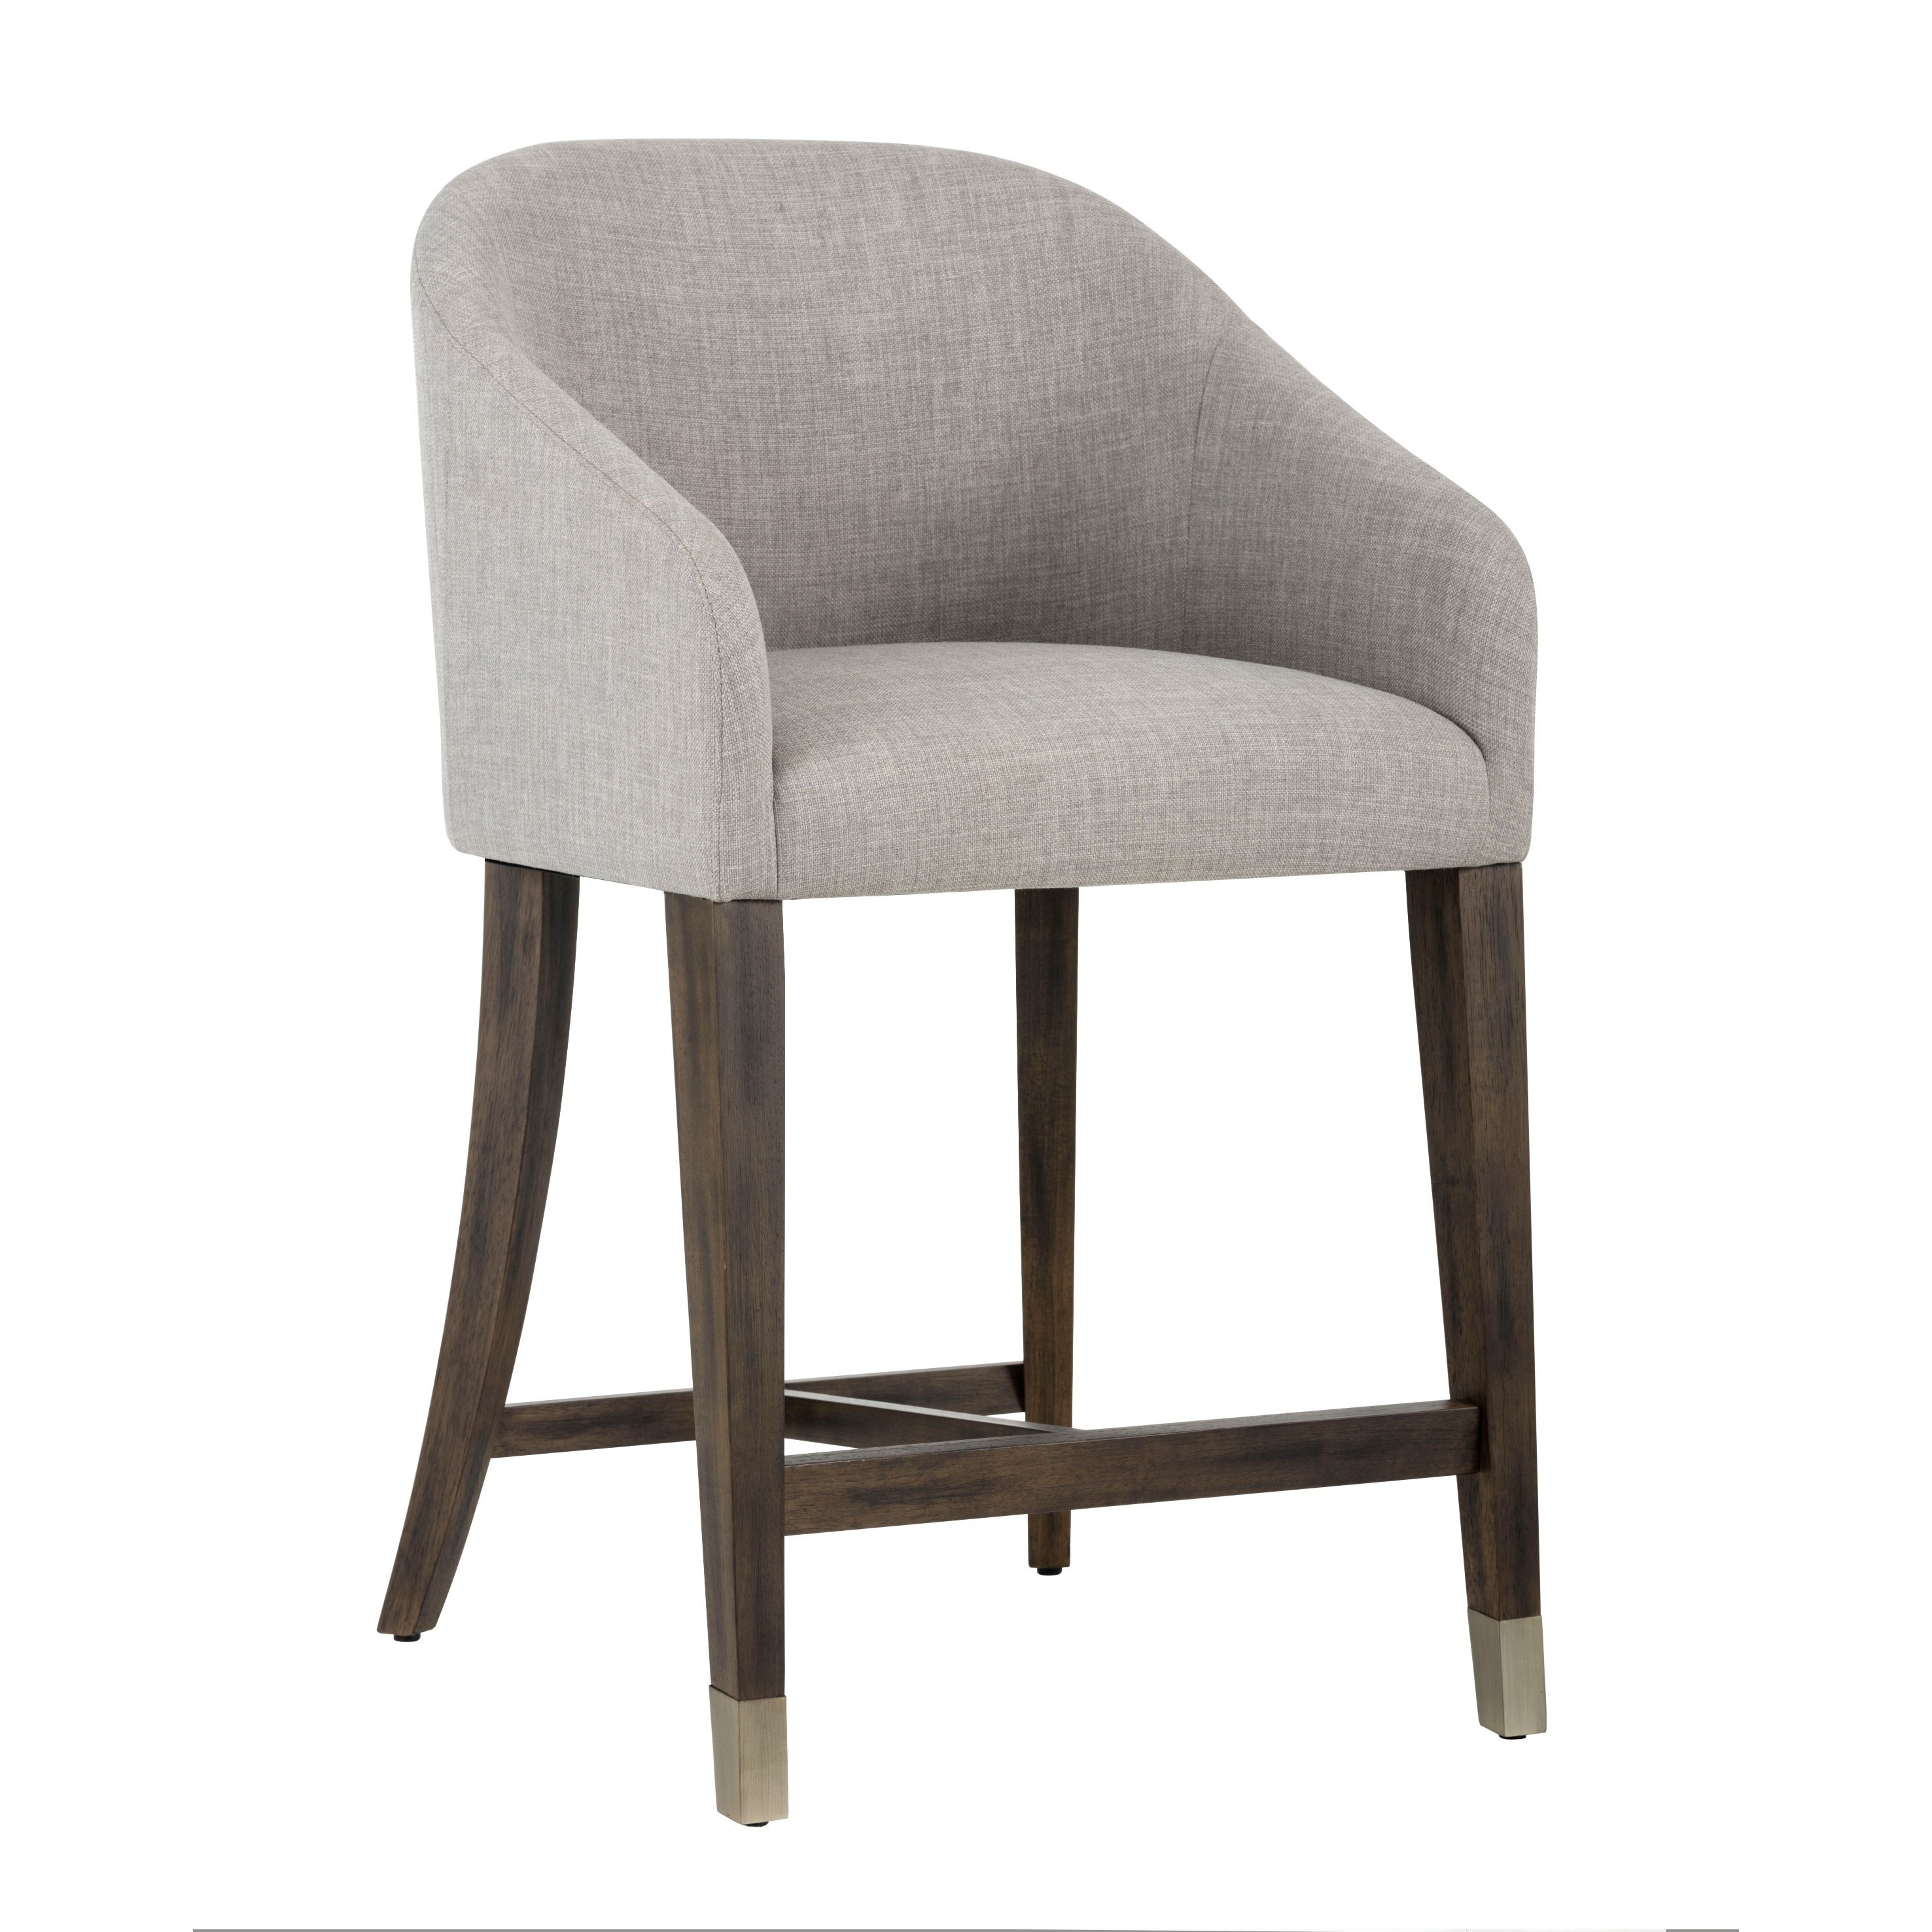 Fabric Bar Stools With Arms